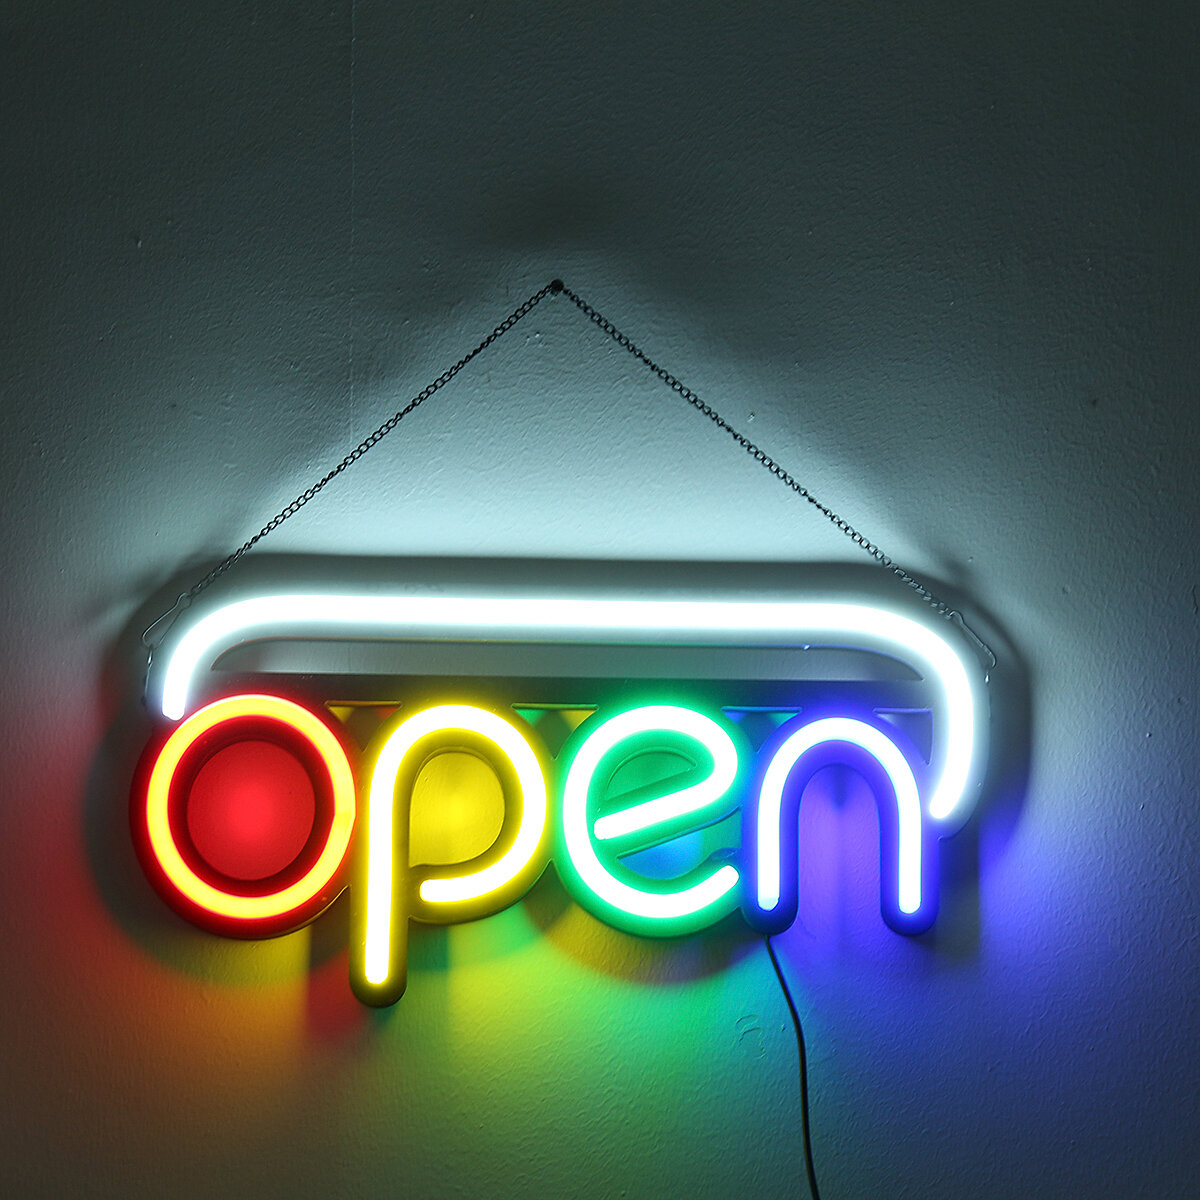 

50x25cm OPEN Sign Advertising LED Neon Light Display Cafe Bar Club Store Wall Decor AC110-240V